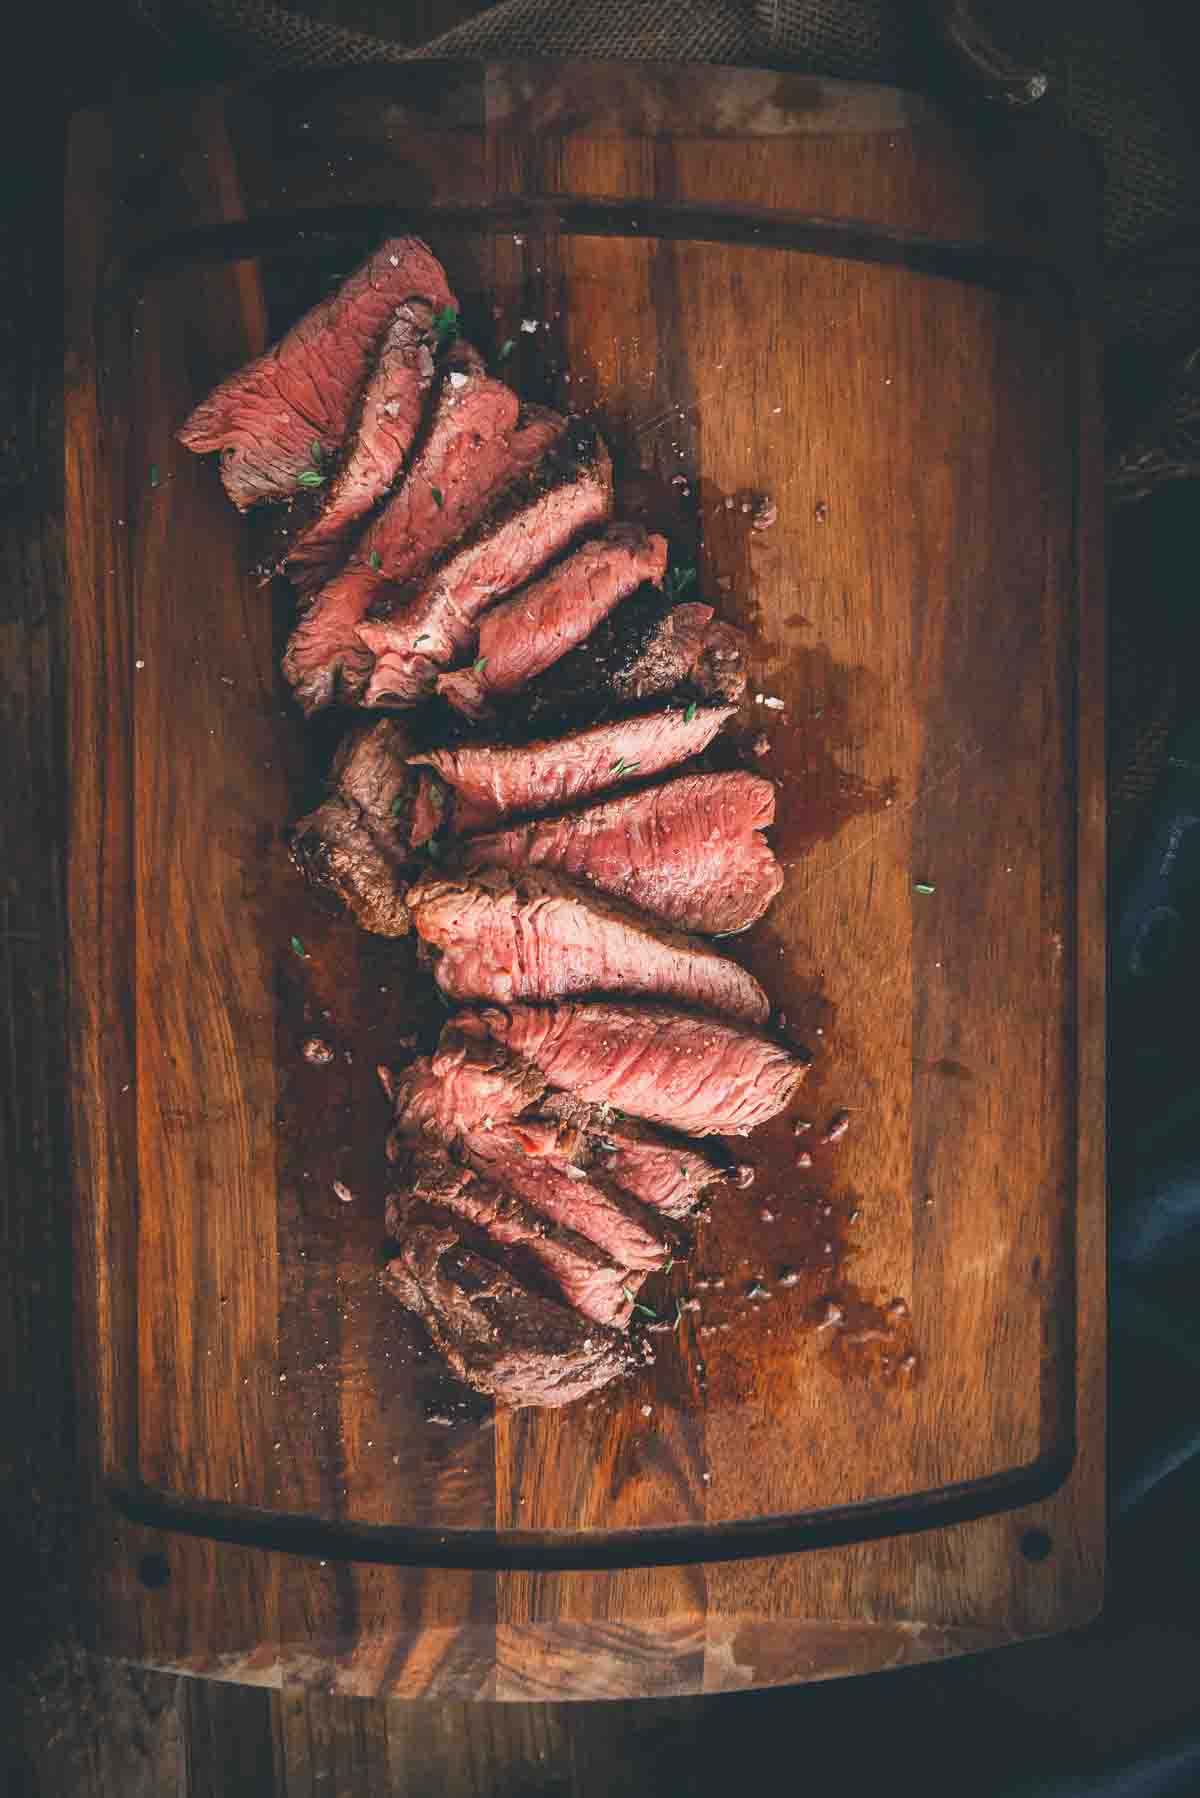 Overhead shot of steak, sliced to show medium rare center, fanned out on cutting board. 